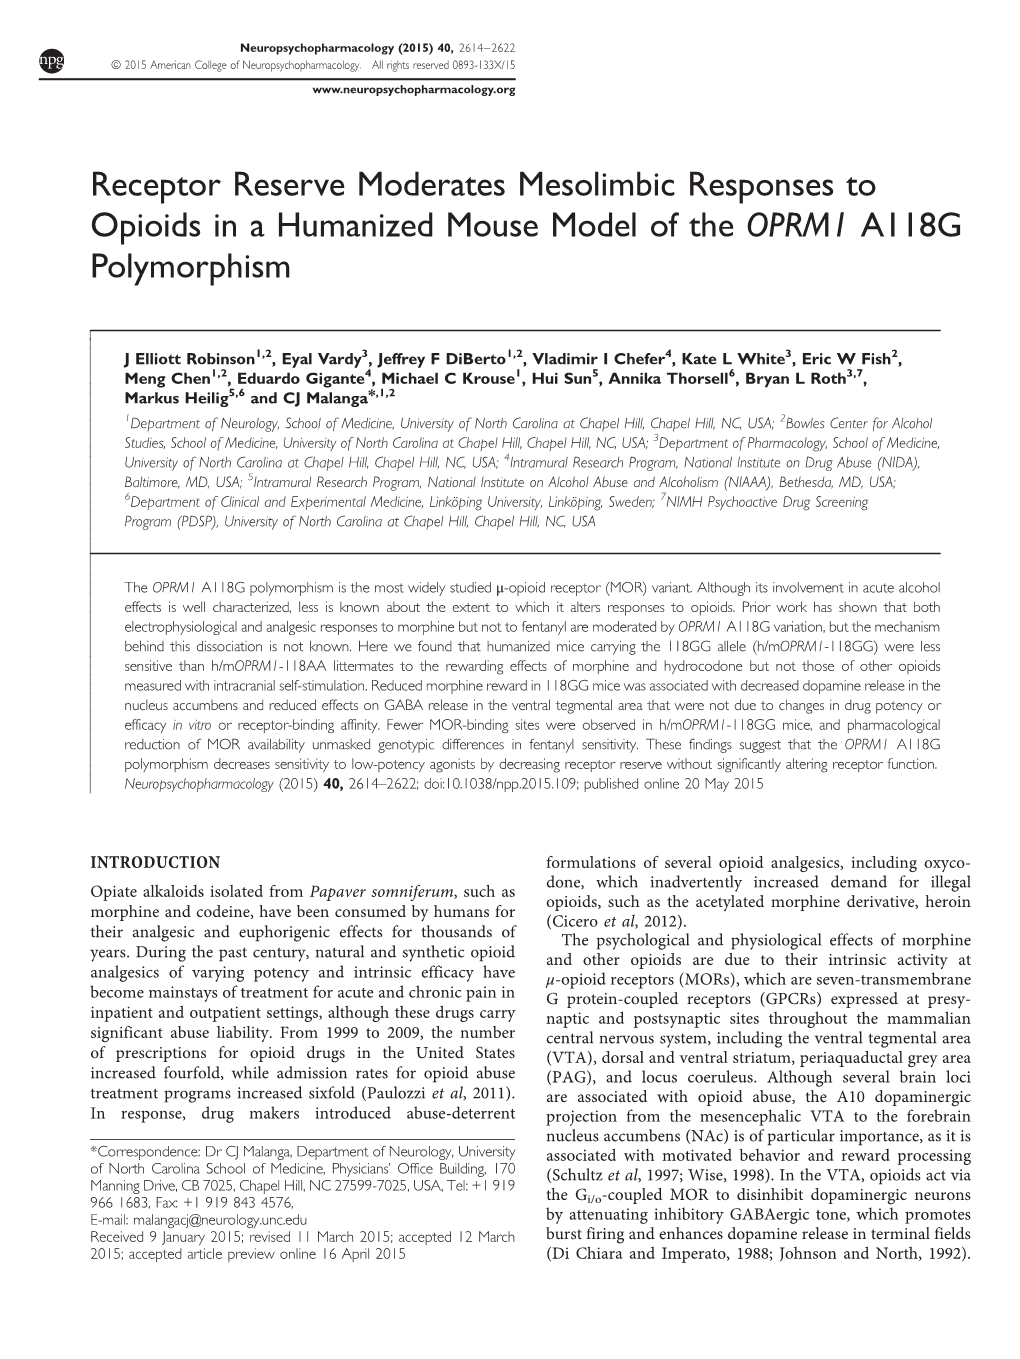 Receptor Reserve Moderates Mesolimbic Responses to Opioids in a Humanized Mouse Model of the OPRM1 A118G Polymorphism